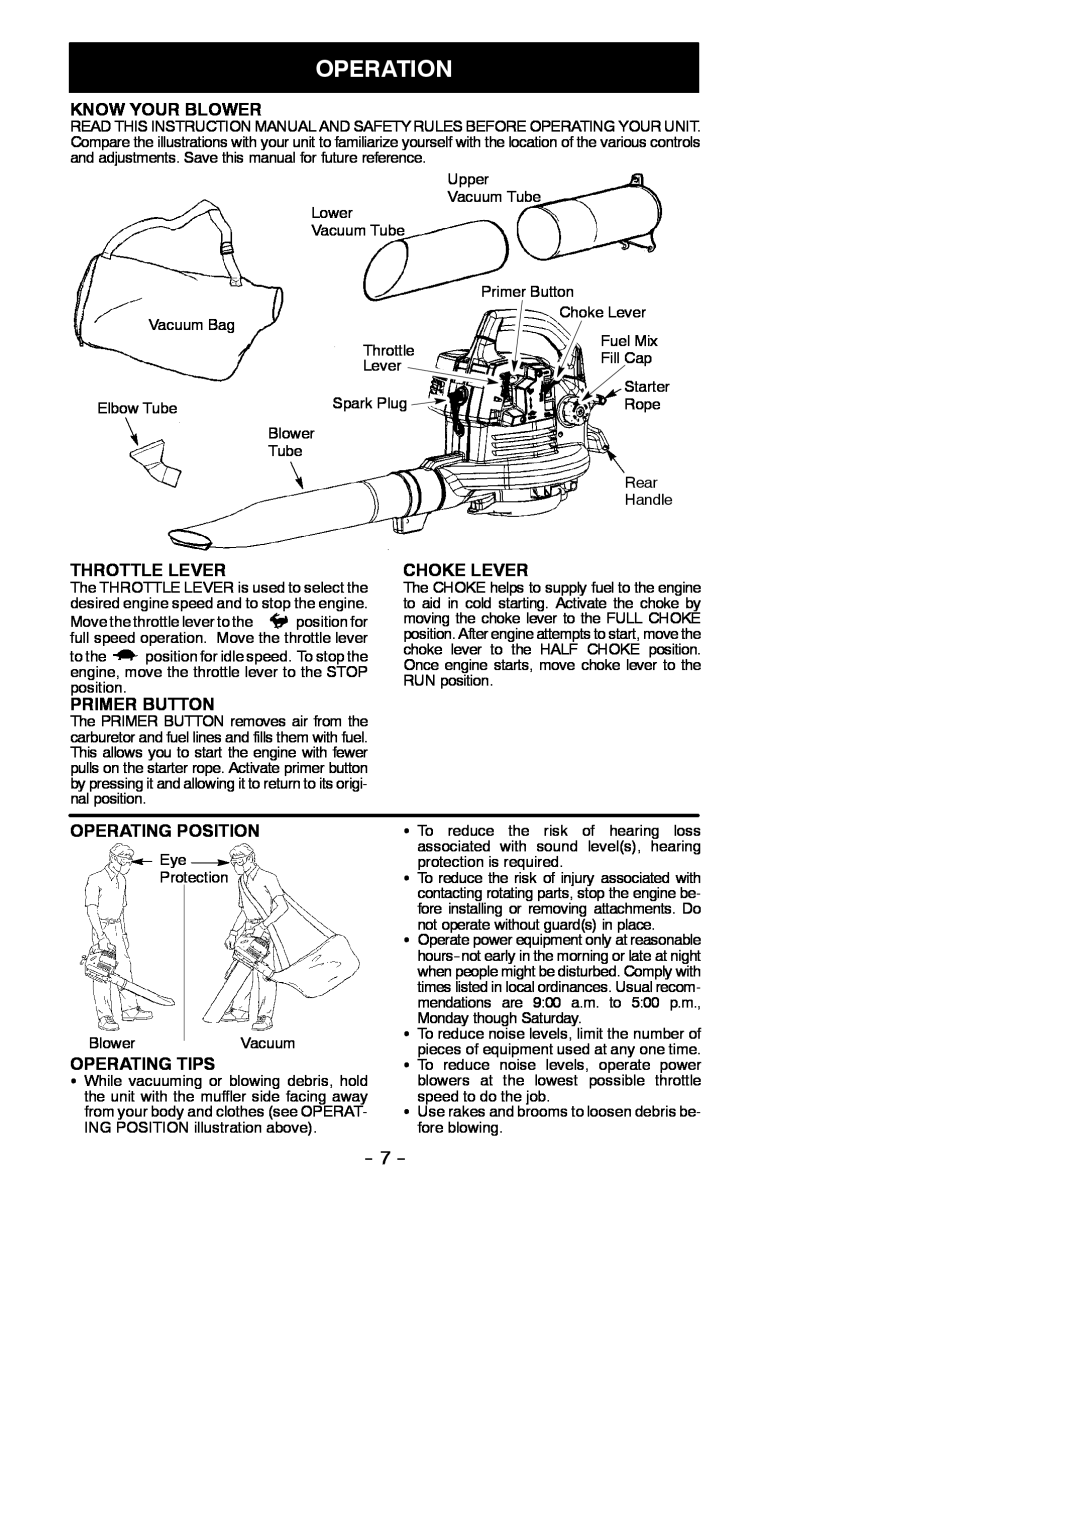 Poulan 545137219 Operation, Know Your Blower, Throttle Lever, Choke Lever, Primer Button, Operating Position 